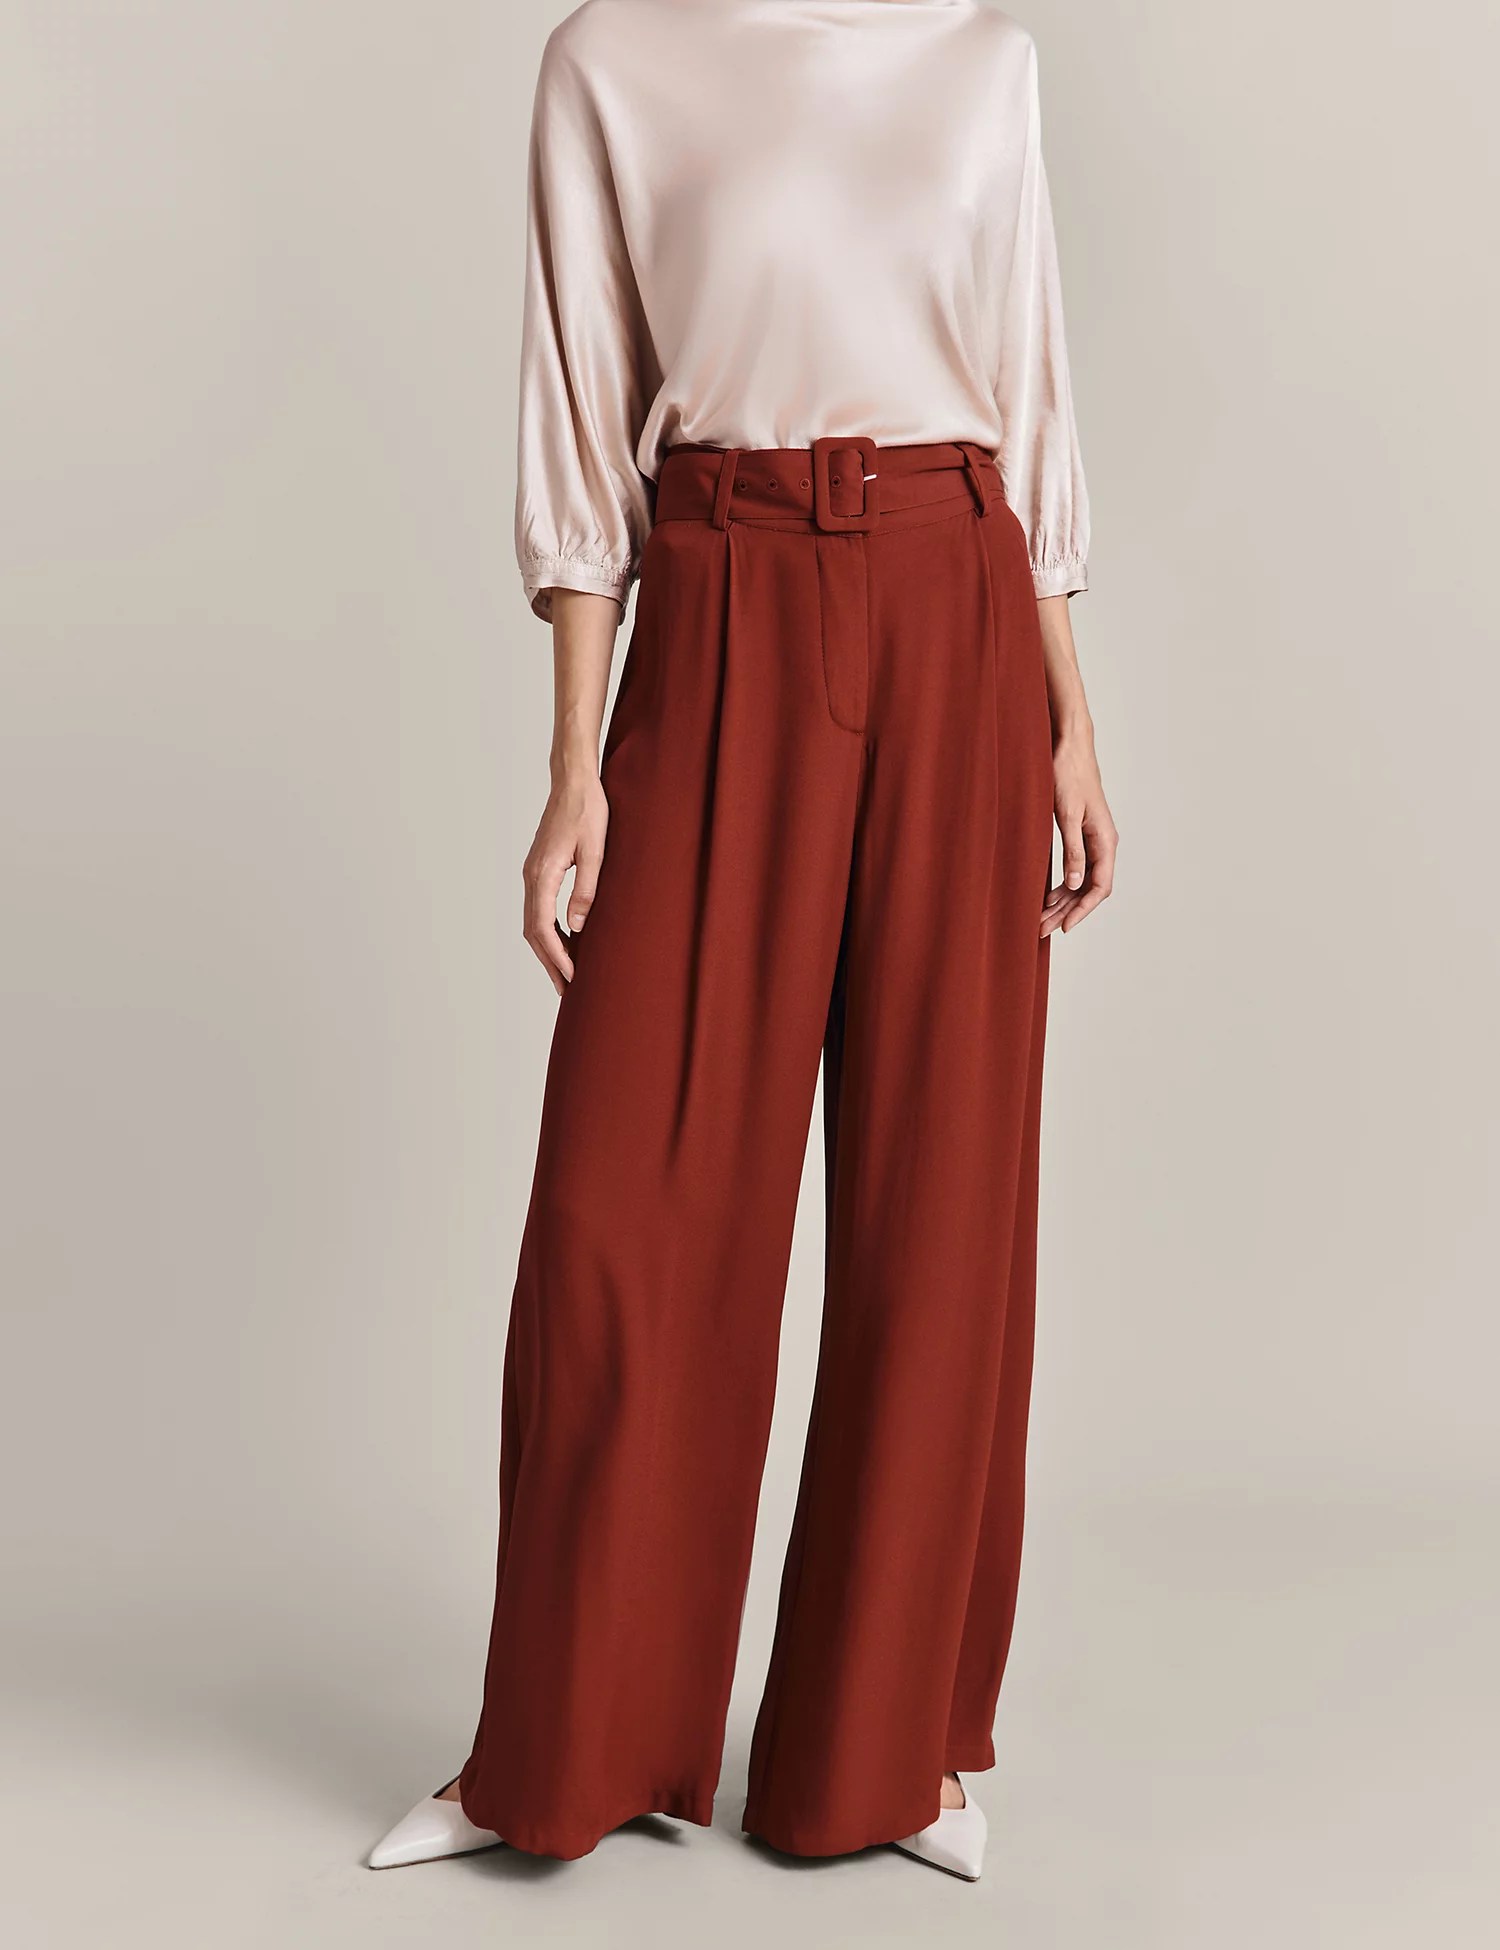 GHOST
Belted Pleat Front Wide Leg Trousers